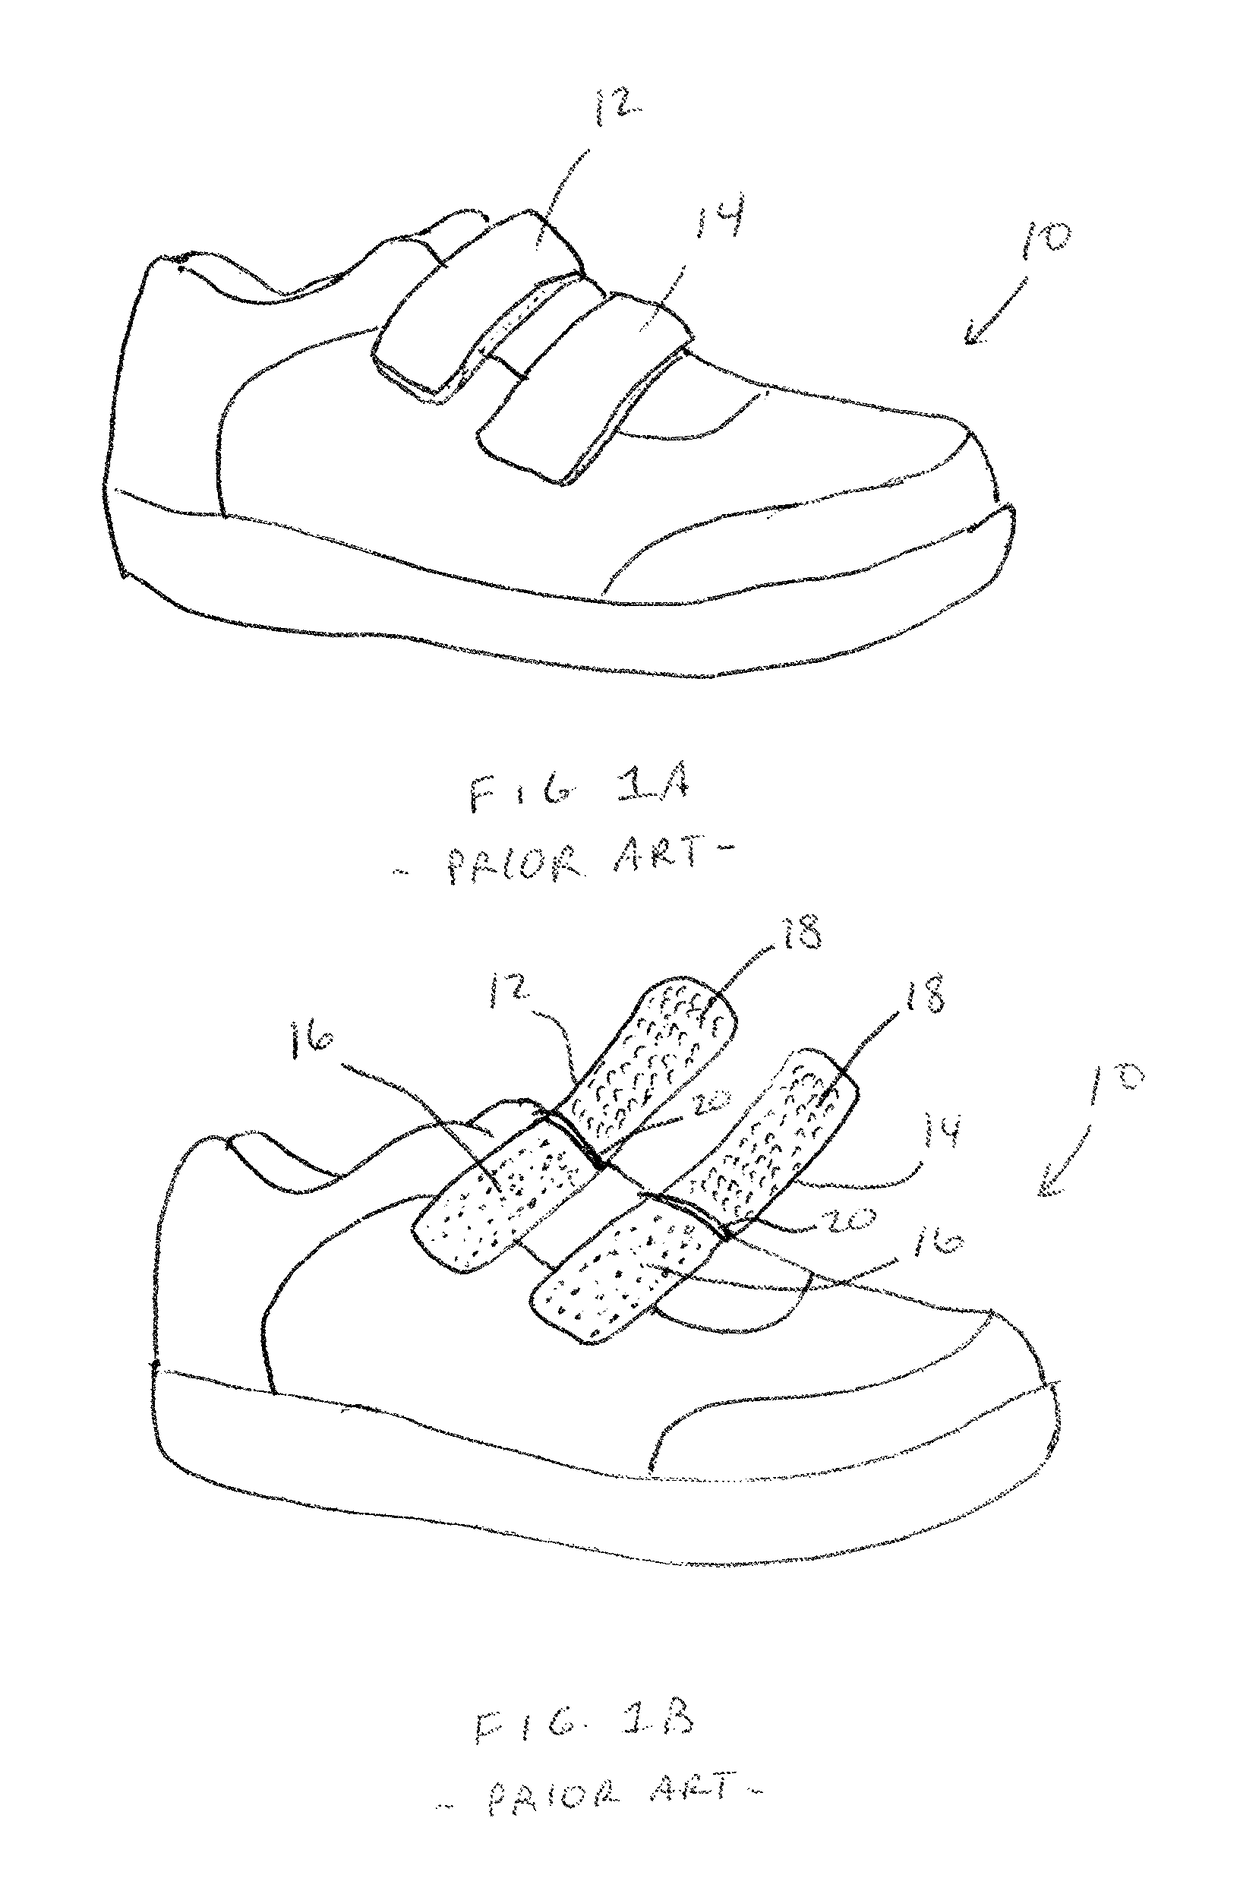 Shoe fastening apparatuses, systems and methods of using the same